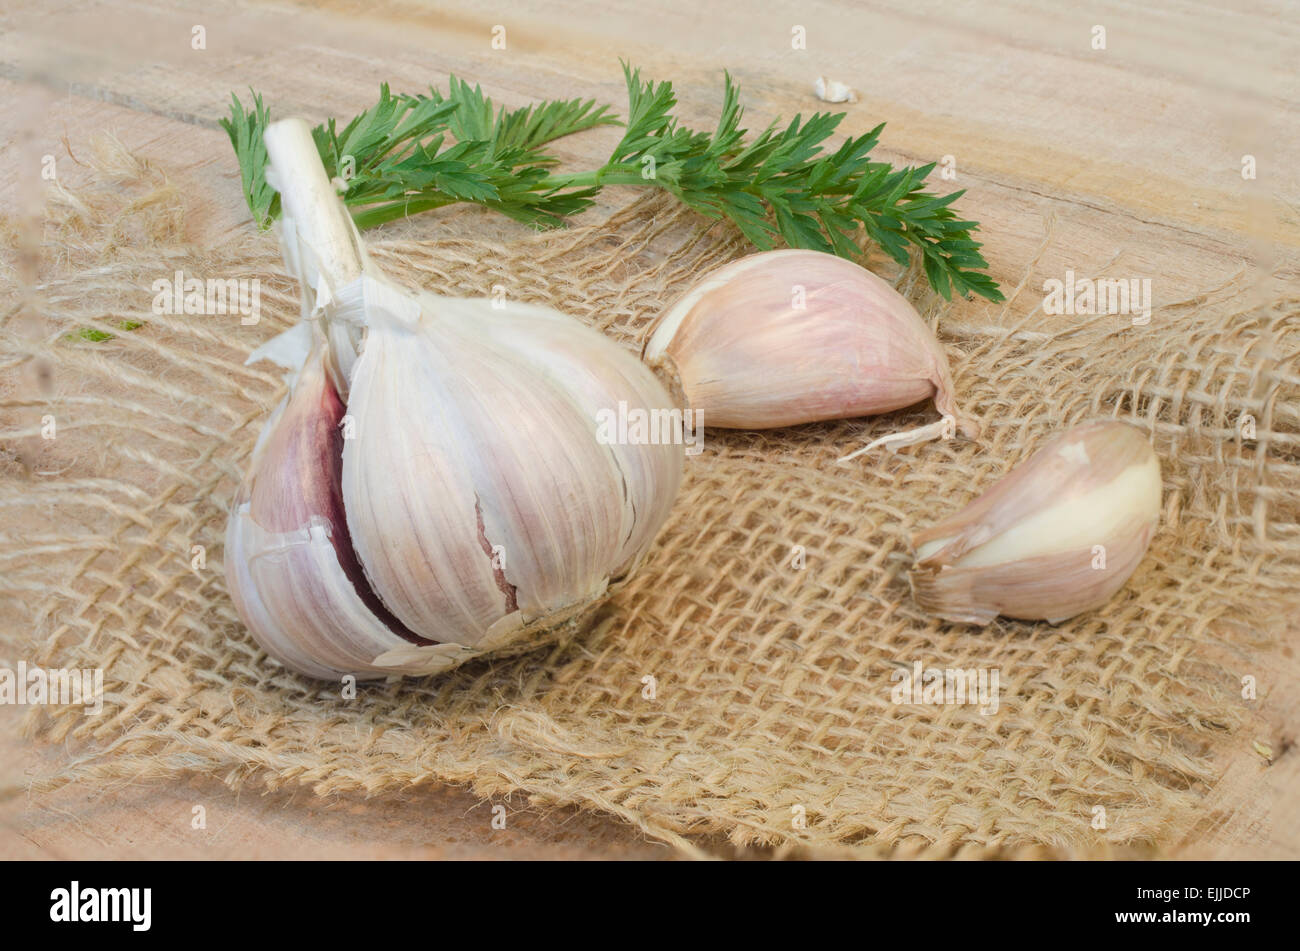 Garlic and parsley leaves on canvas isolated on wooden background Stock Photo